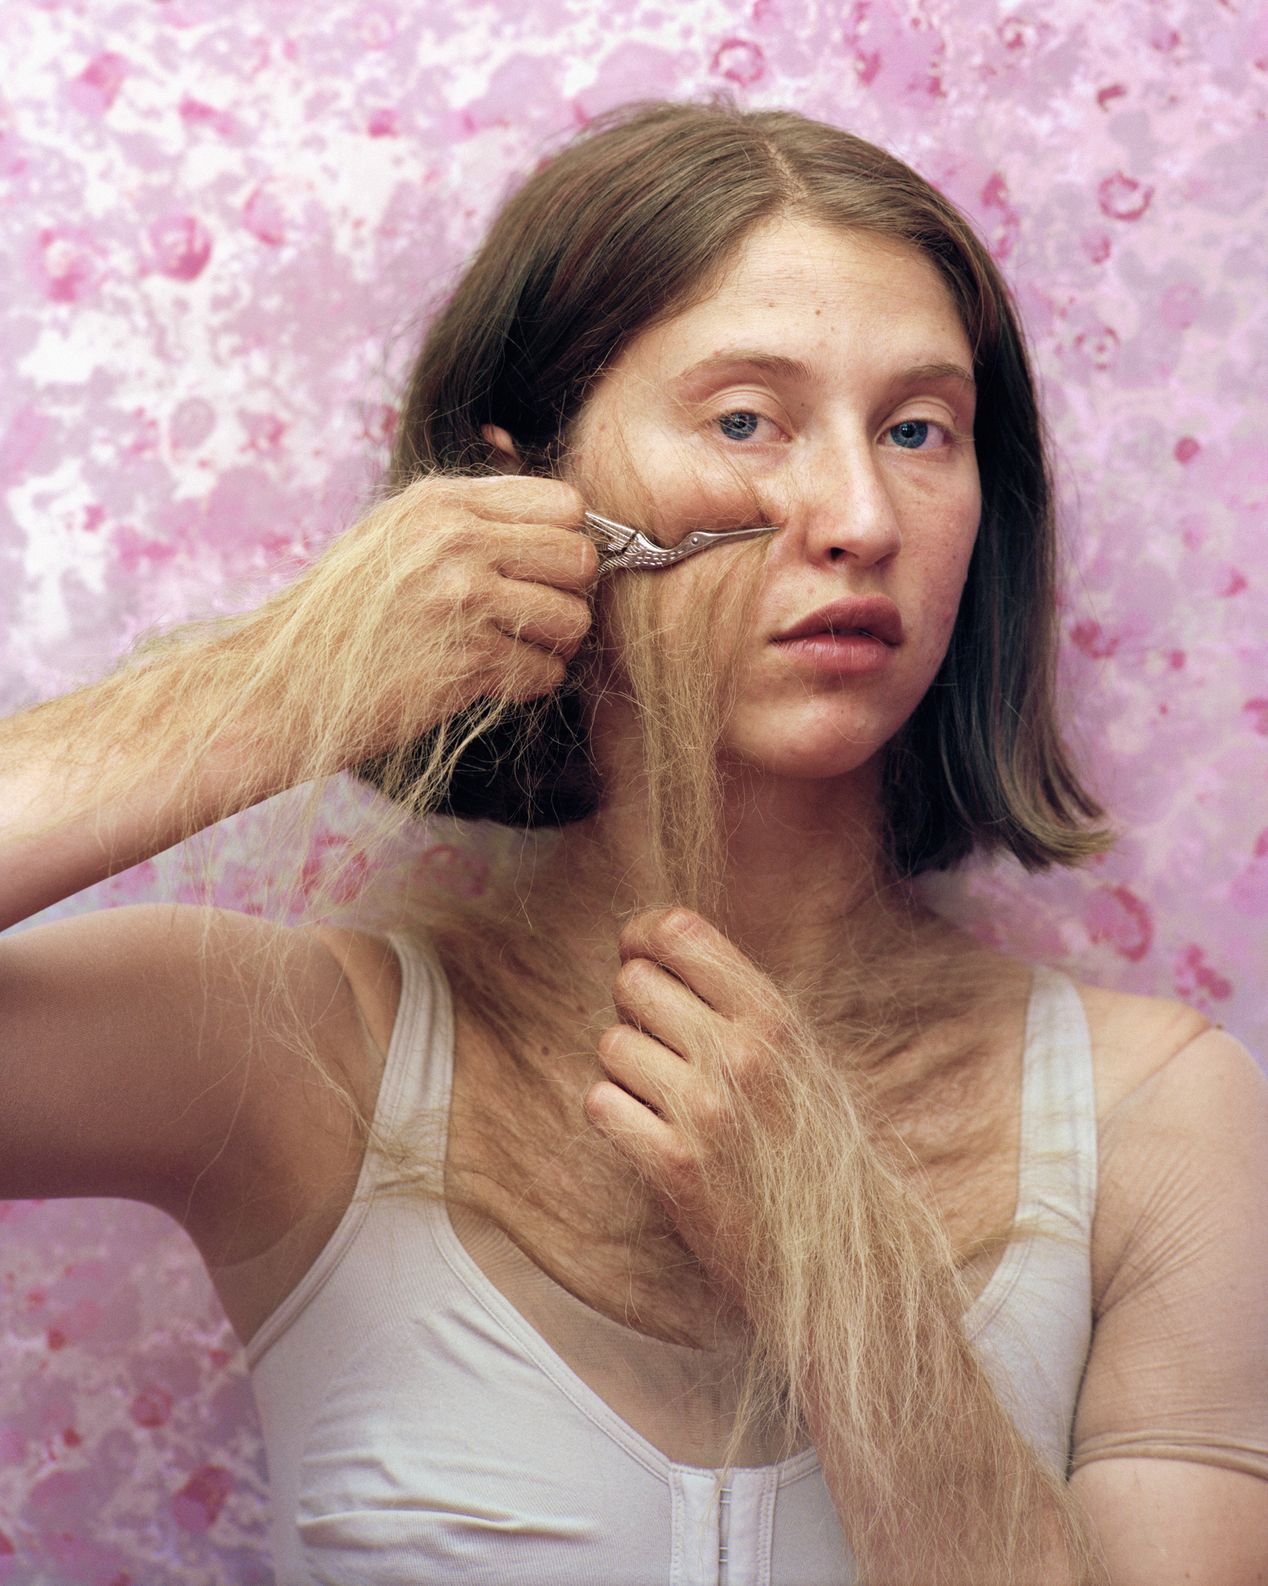 A young woman applying hair to her cheeks, art photography, Ilona Szwarc, contemporary Los Angeles artist.